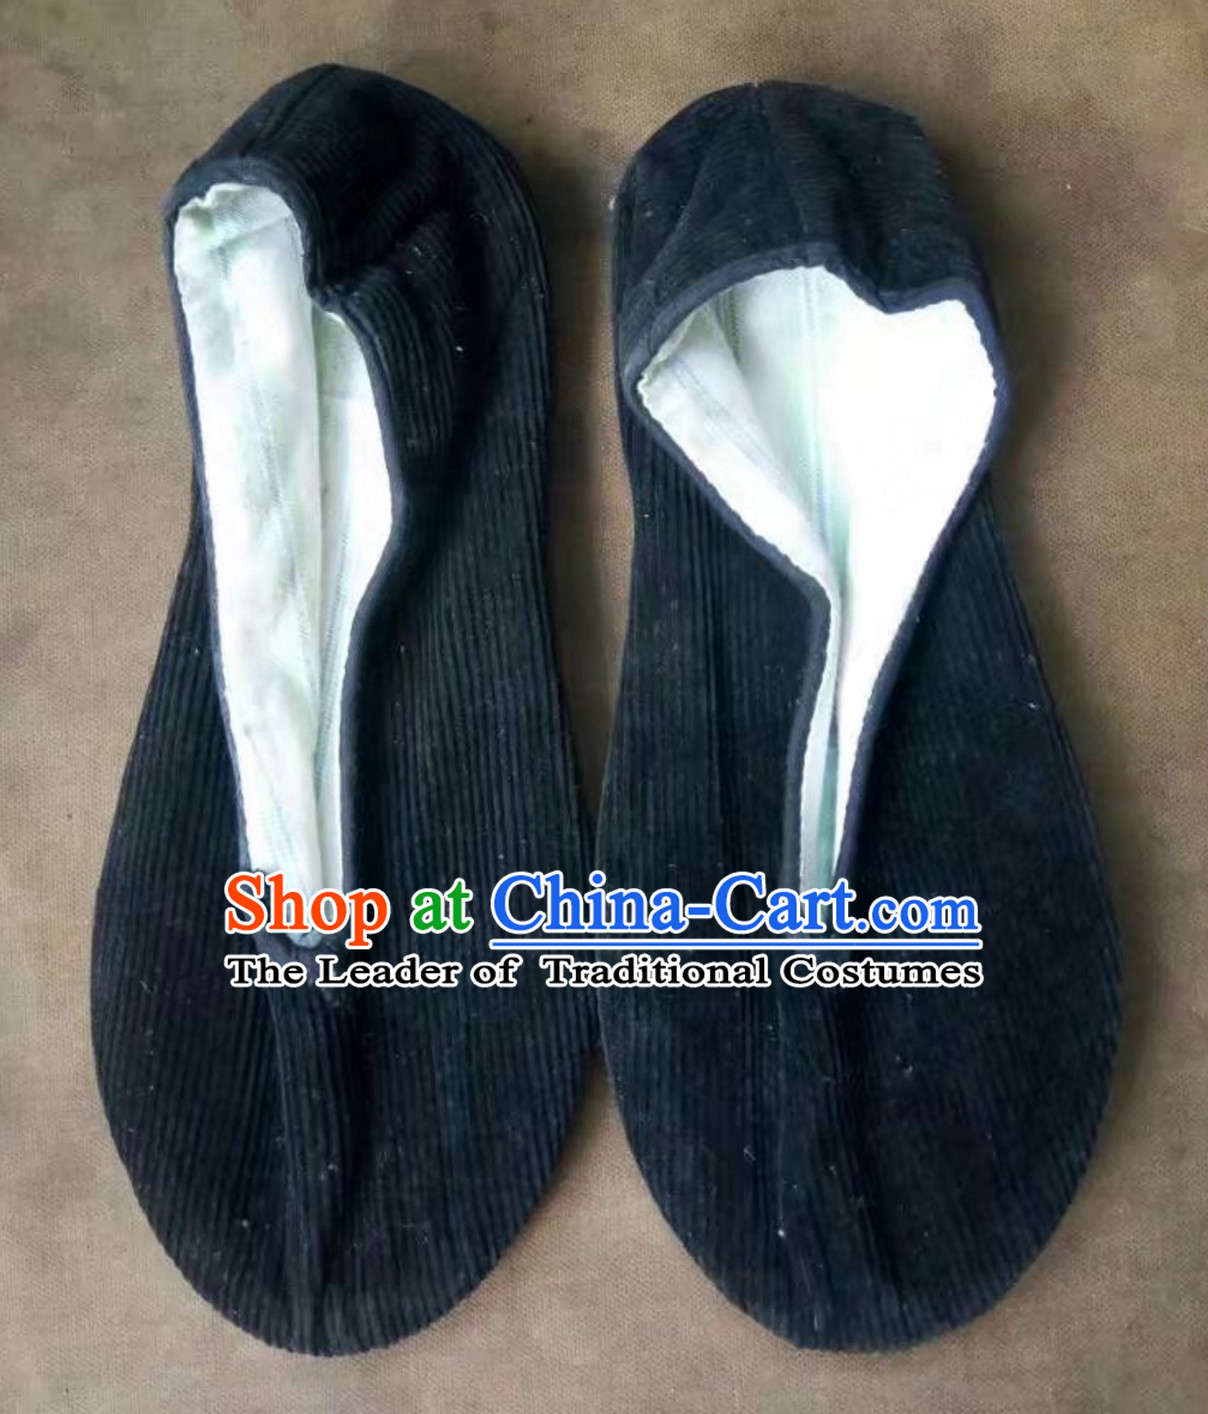 Traditional Chinese Classical Style Handmade Old Shoes